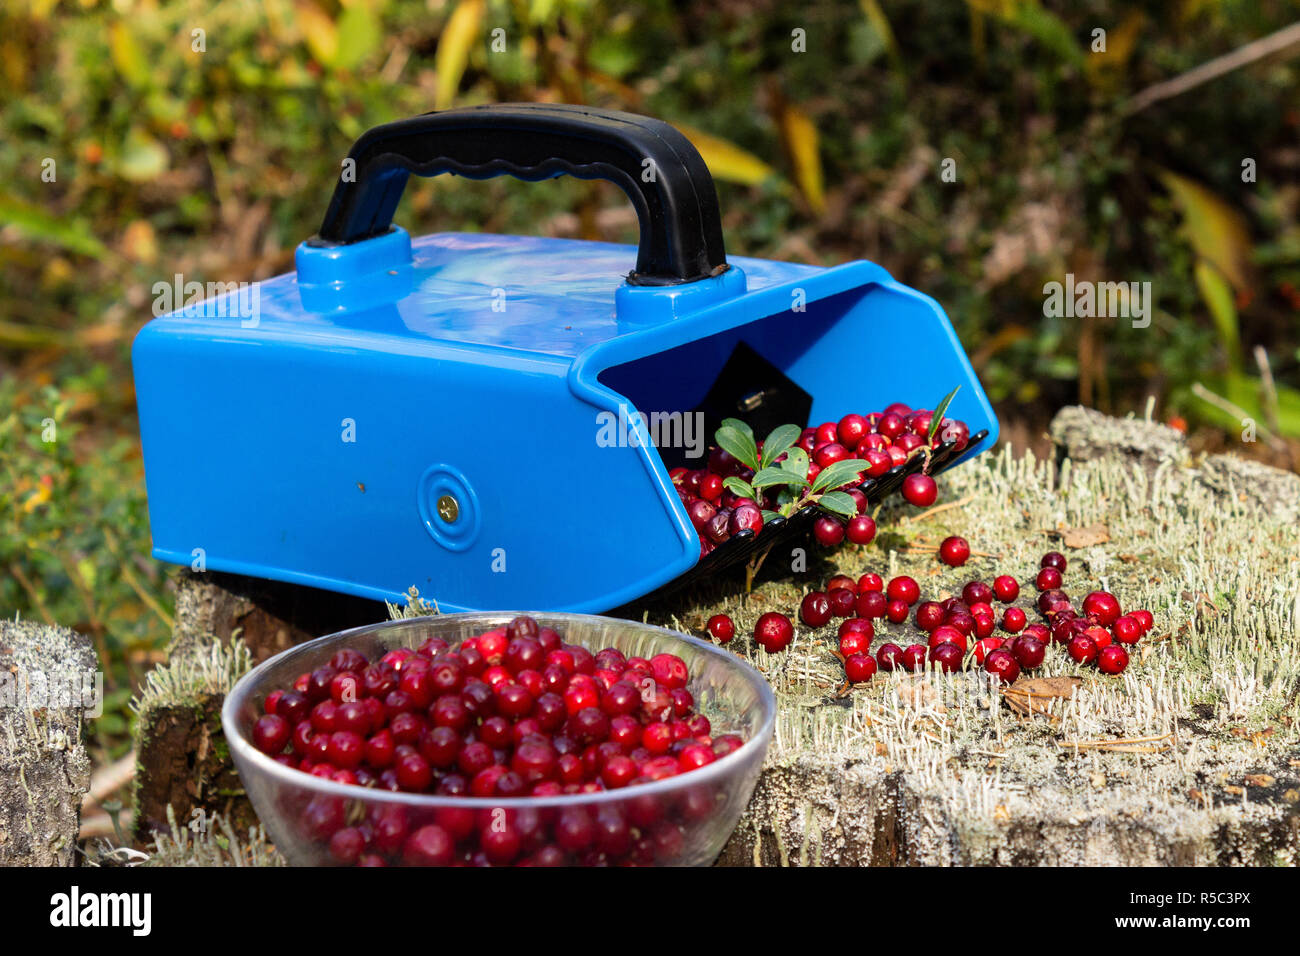 Close view of a blue plastic lingonberry rake and bowl full of raw ripe lingonberries (sp. Vaccinium vitis-idaea) on a tree bark in the forest. Sweden Stock Photo